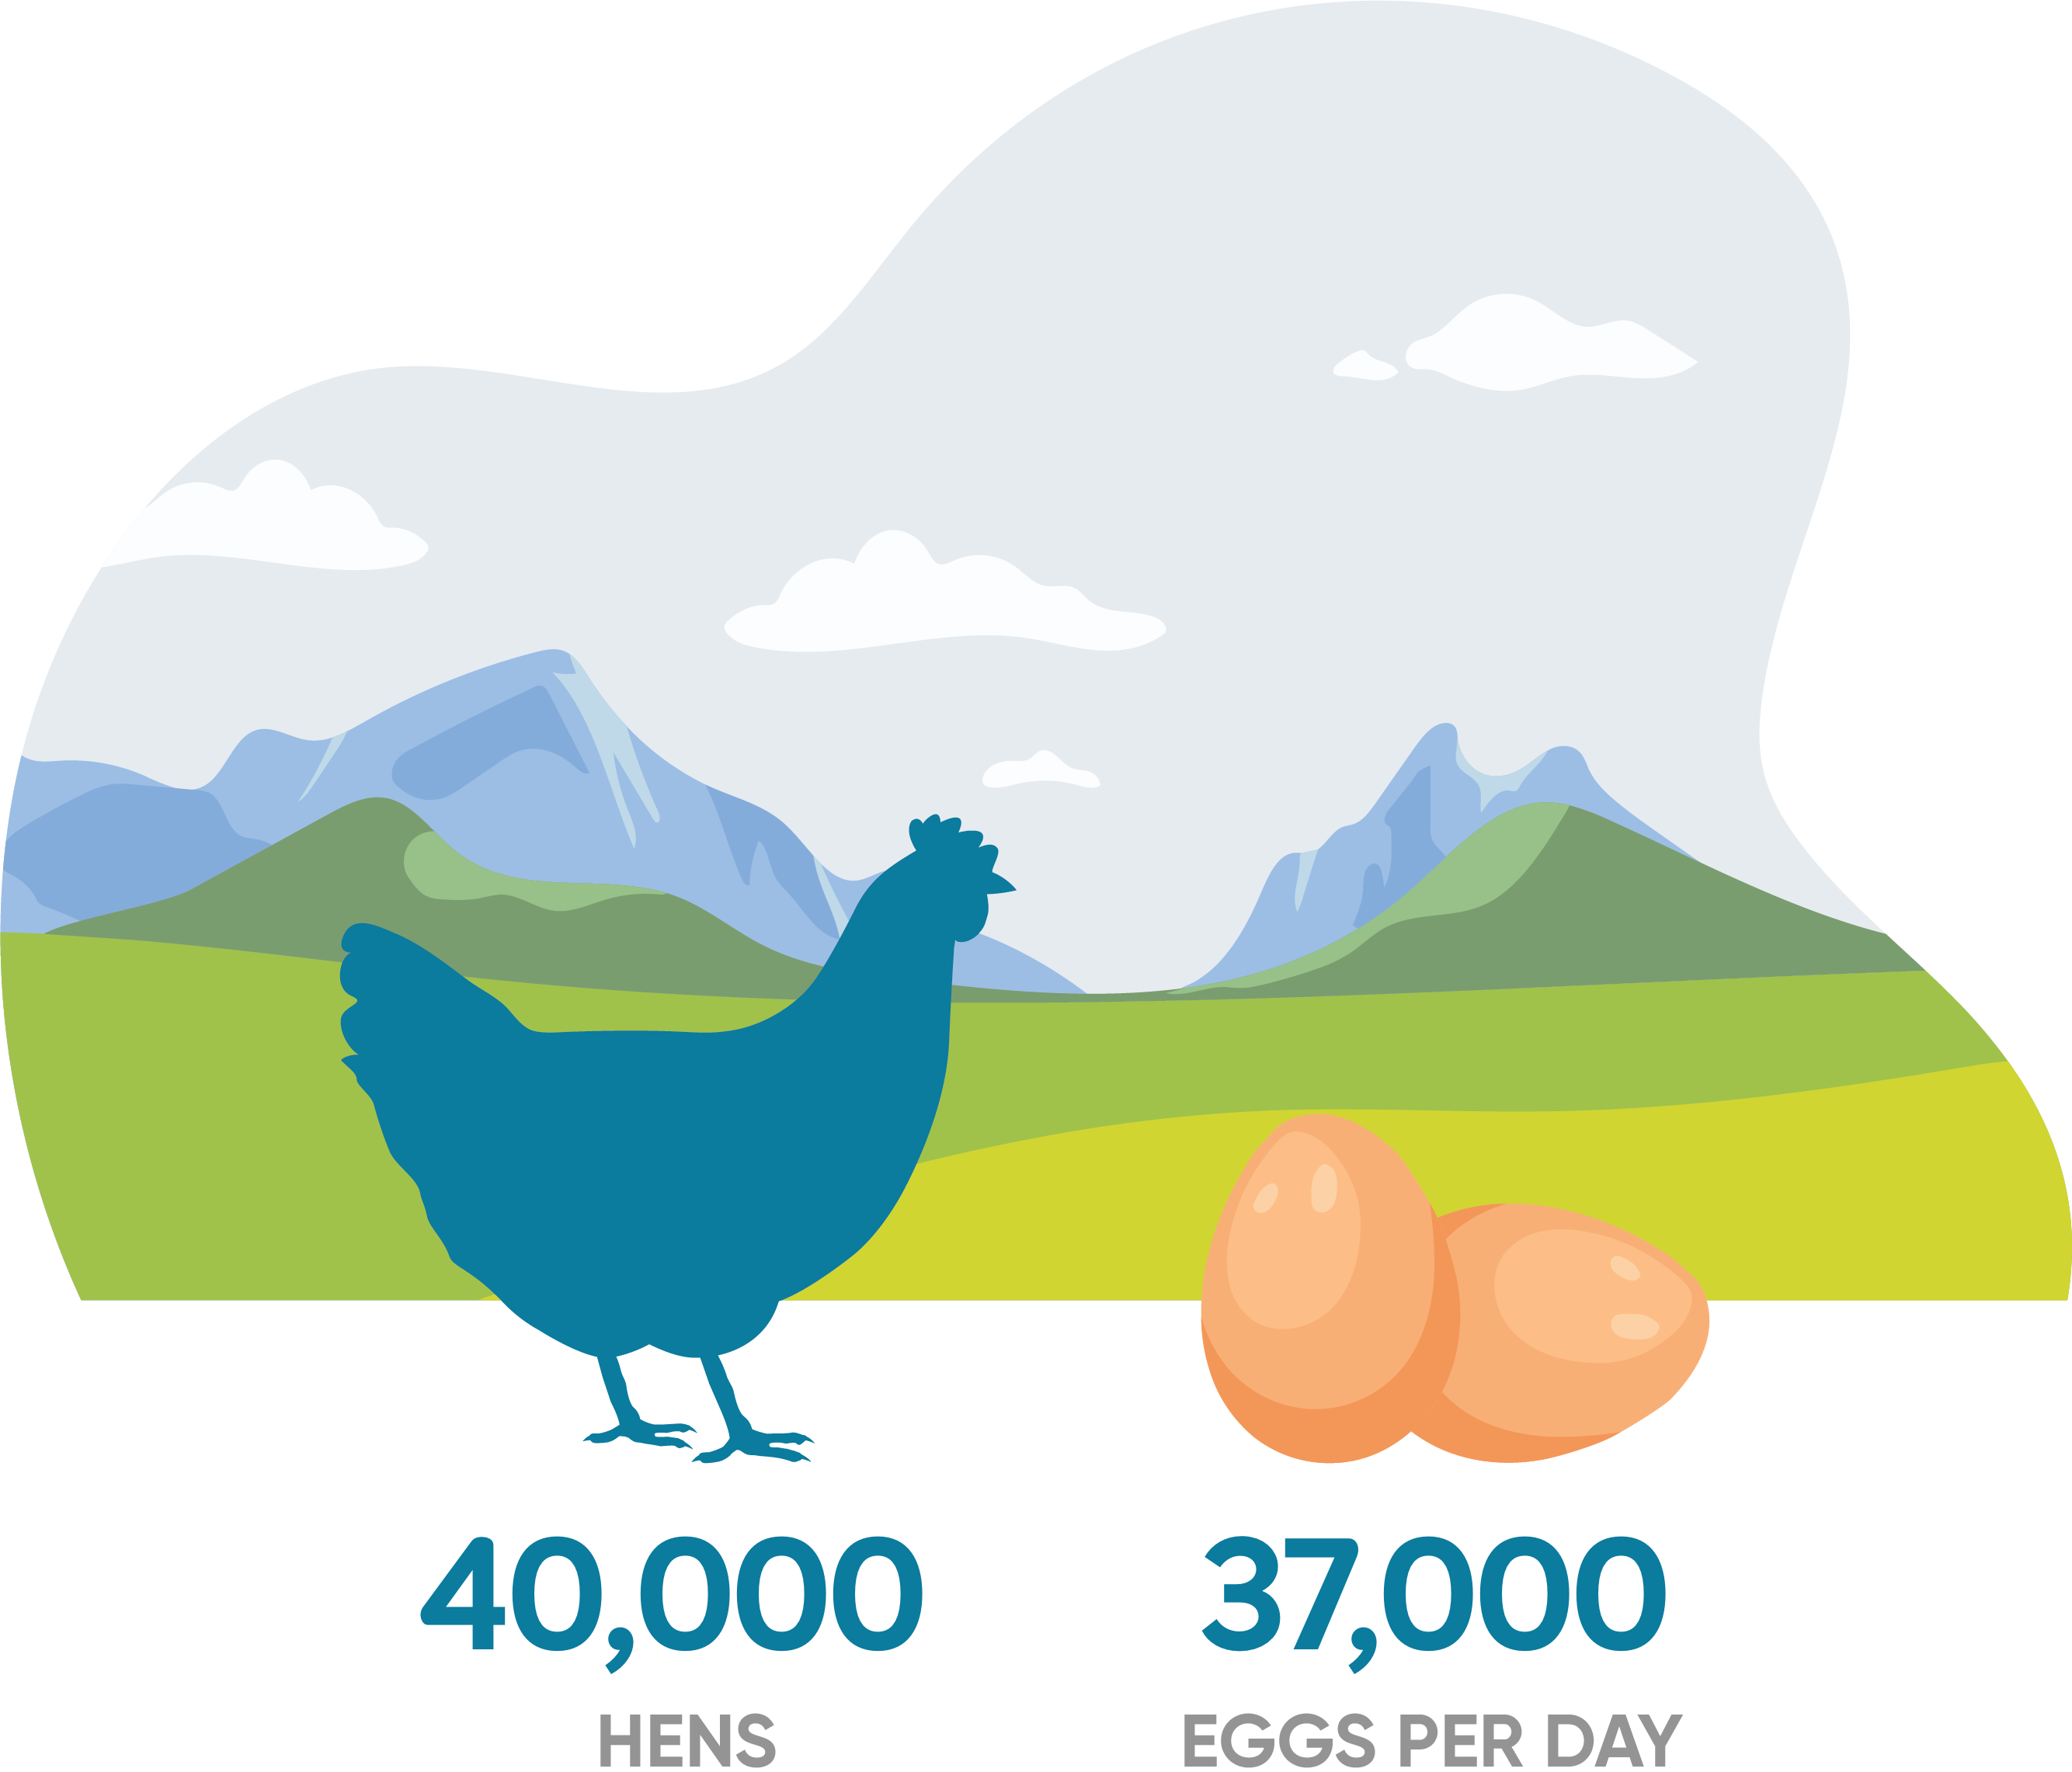  farming in british columbia - image of egg chicken stats - Daybreak Farms